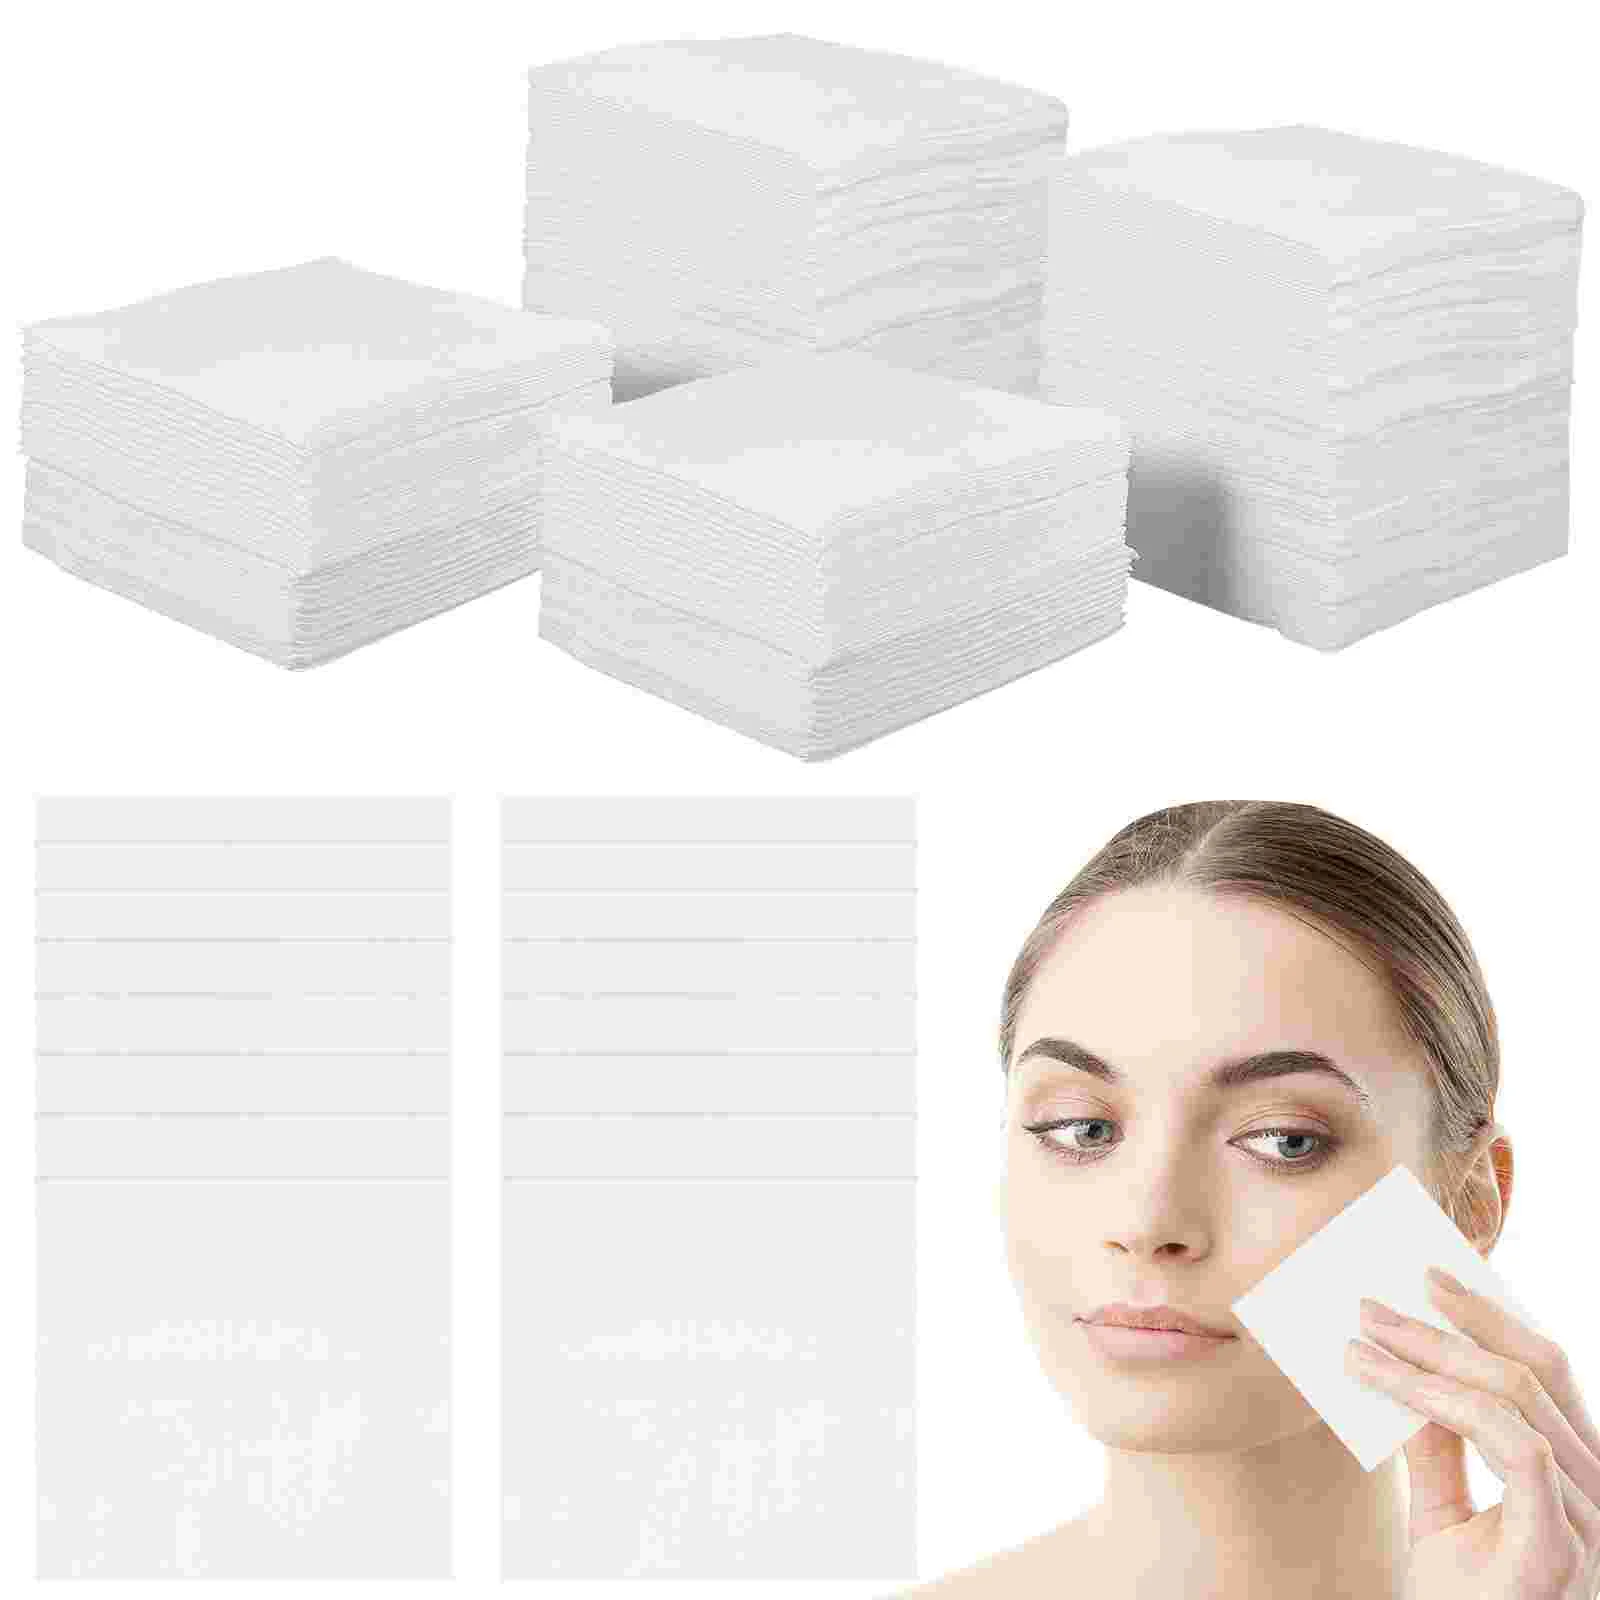 200 Pcs Makeup Wipes Cotton Pads Face Toner Nail Polish Remover Disposable Round Facial Cleansing